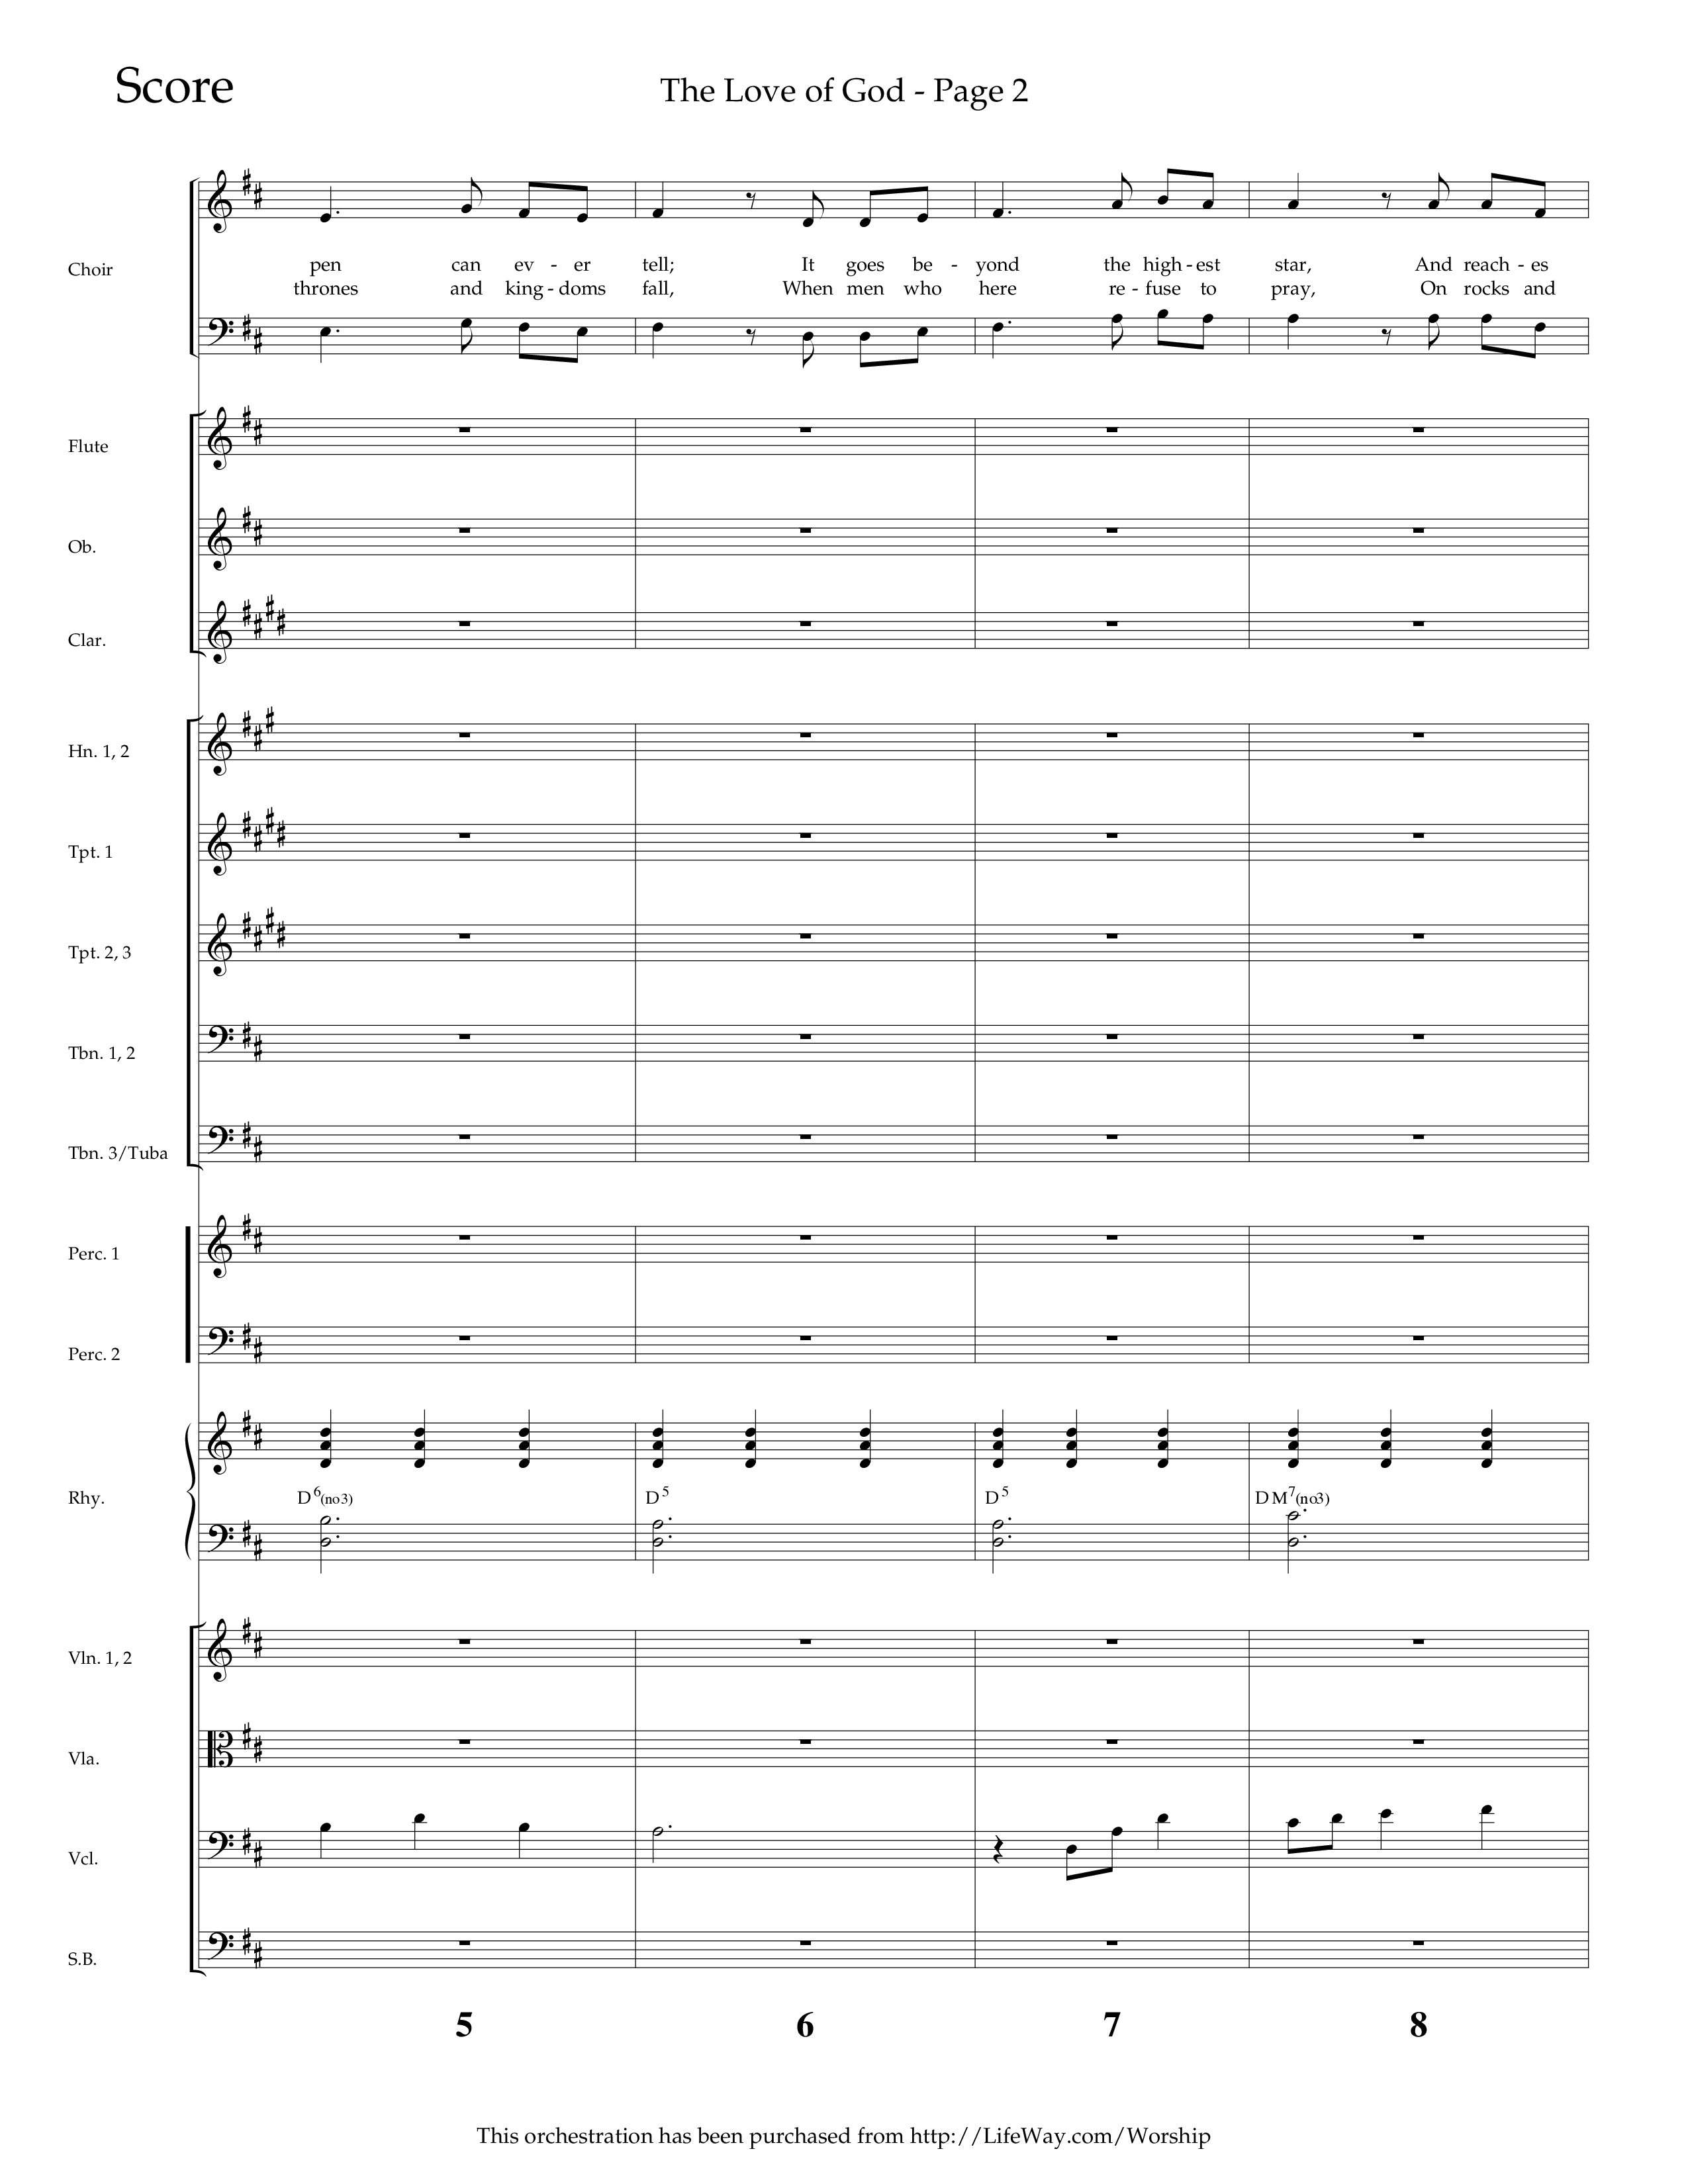 The Love of God (Choral Anthem SATB) Conductor's Score (Arr. Charlie Sinclair / Orch. Scott Harris / Lifeway Choral)